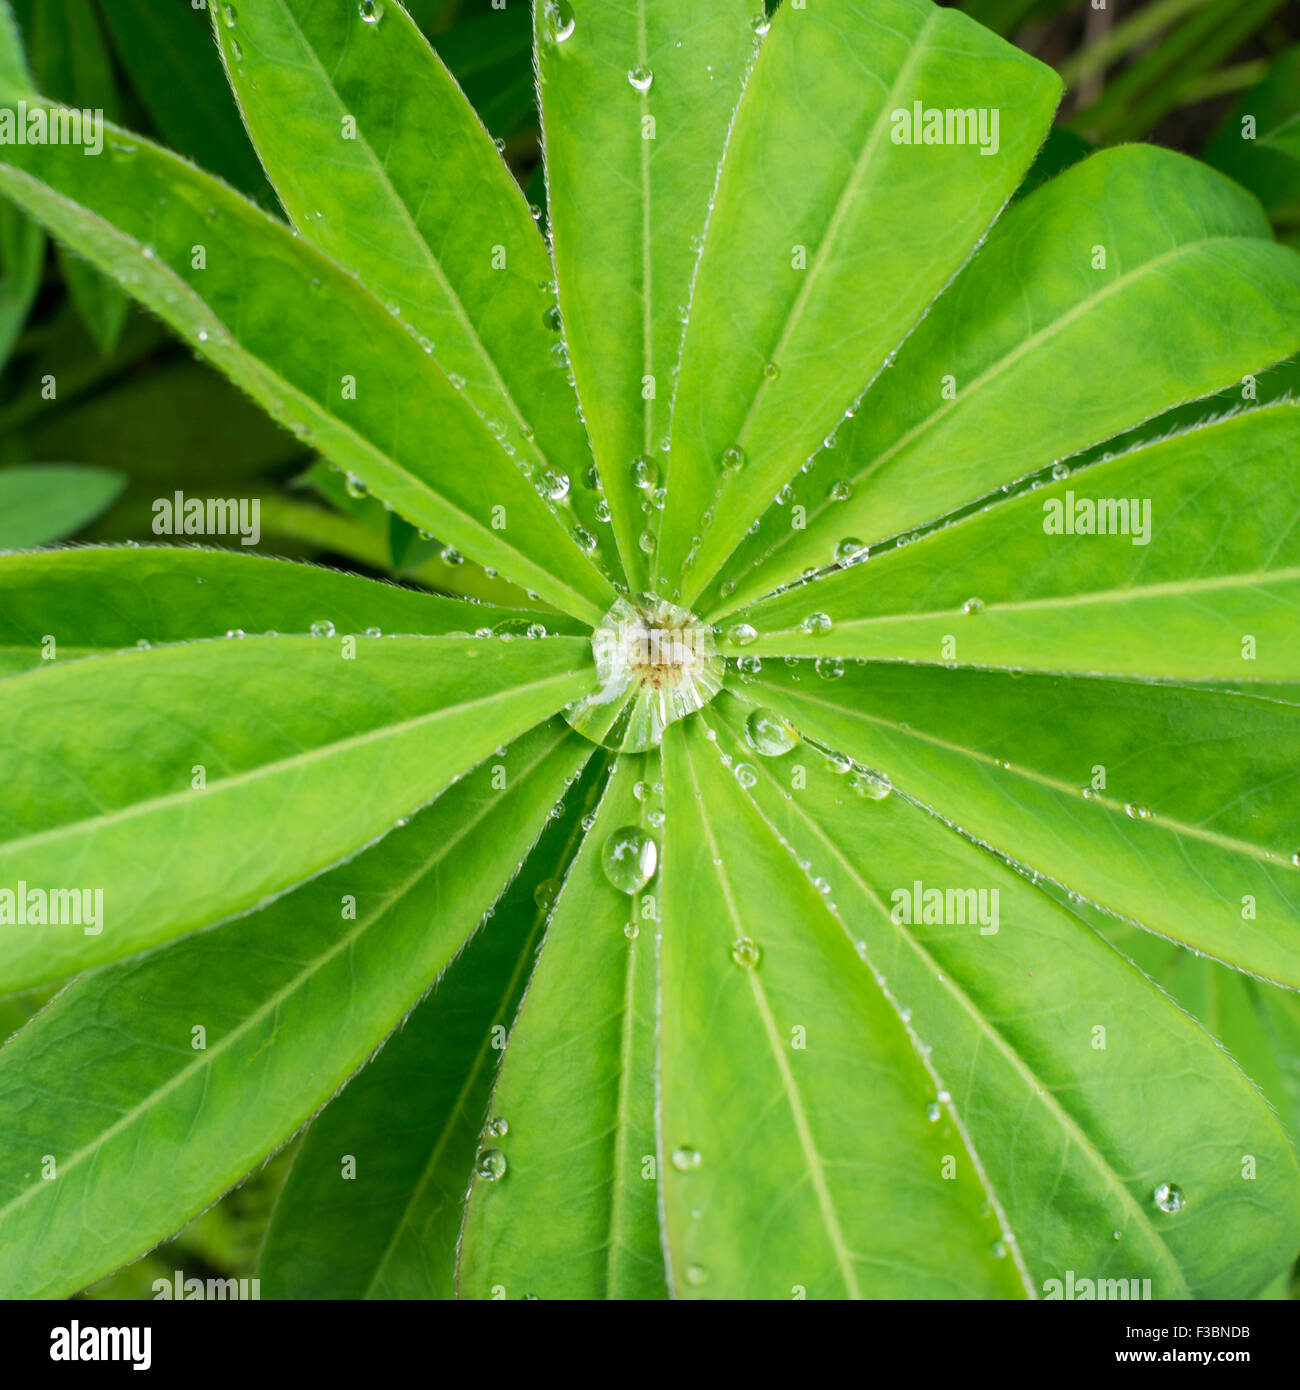 Drops in green leaf Stock Photo